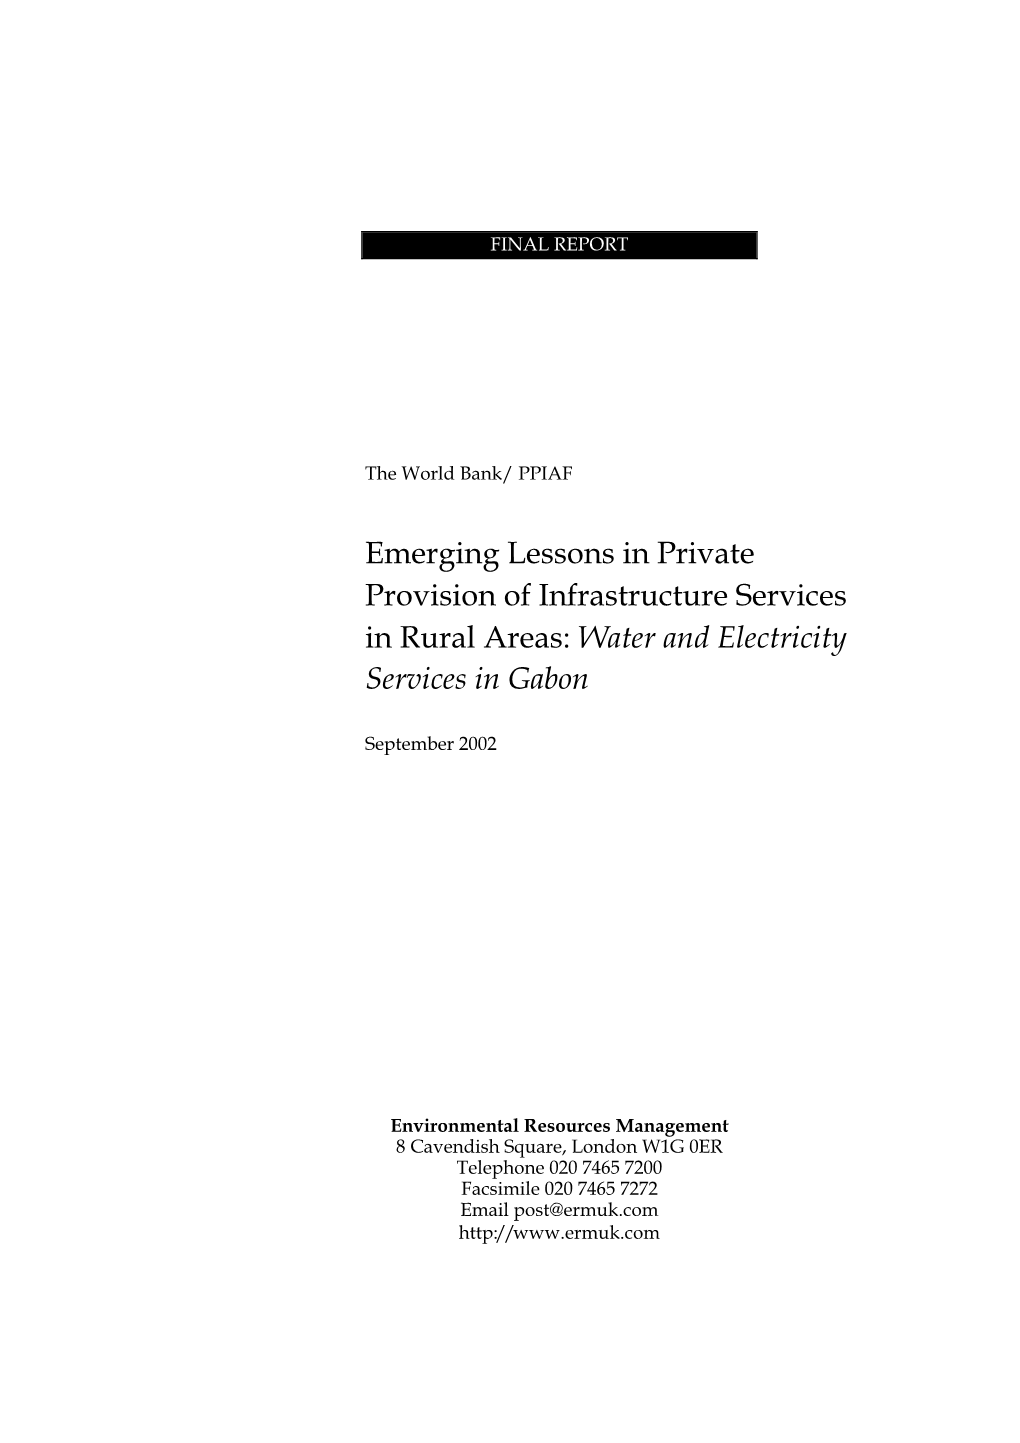 Emerging Lessons in Private Provision of Infrastructure Services in Rural Areas: Water and Electricity Services in Gabon